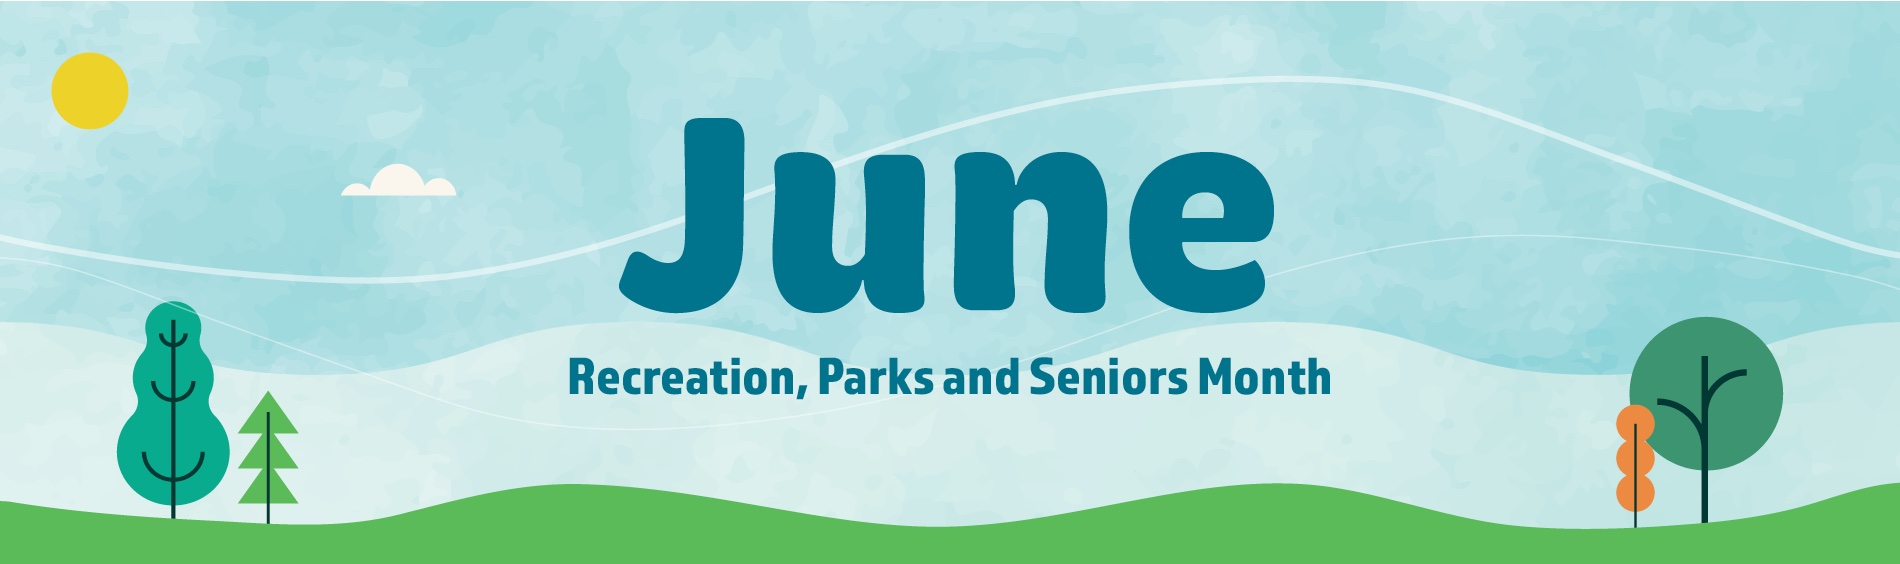 Virtual trees and grass for June is Recreation, Parks and Seniors Month